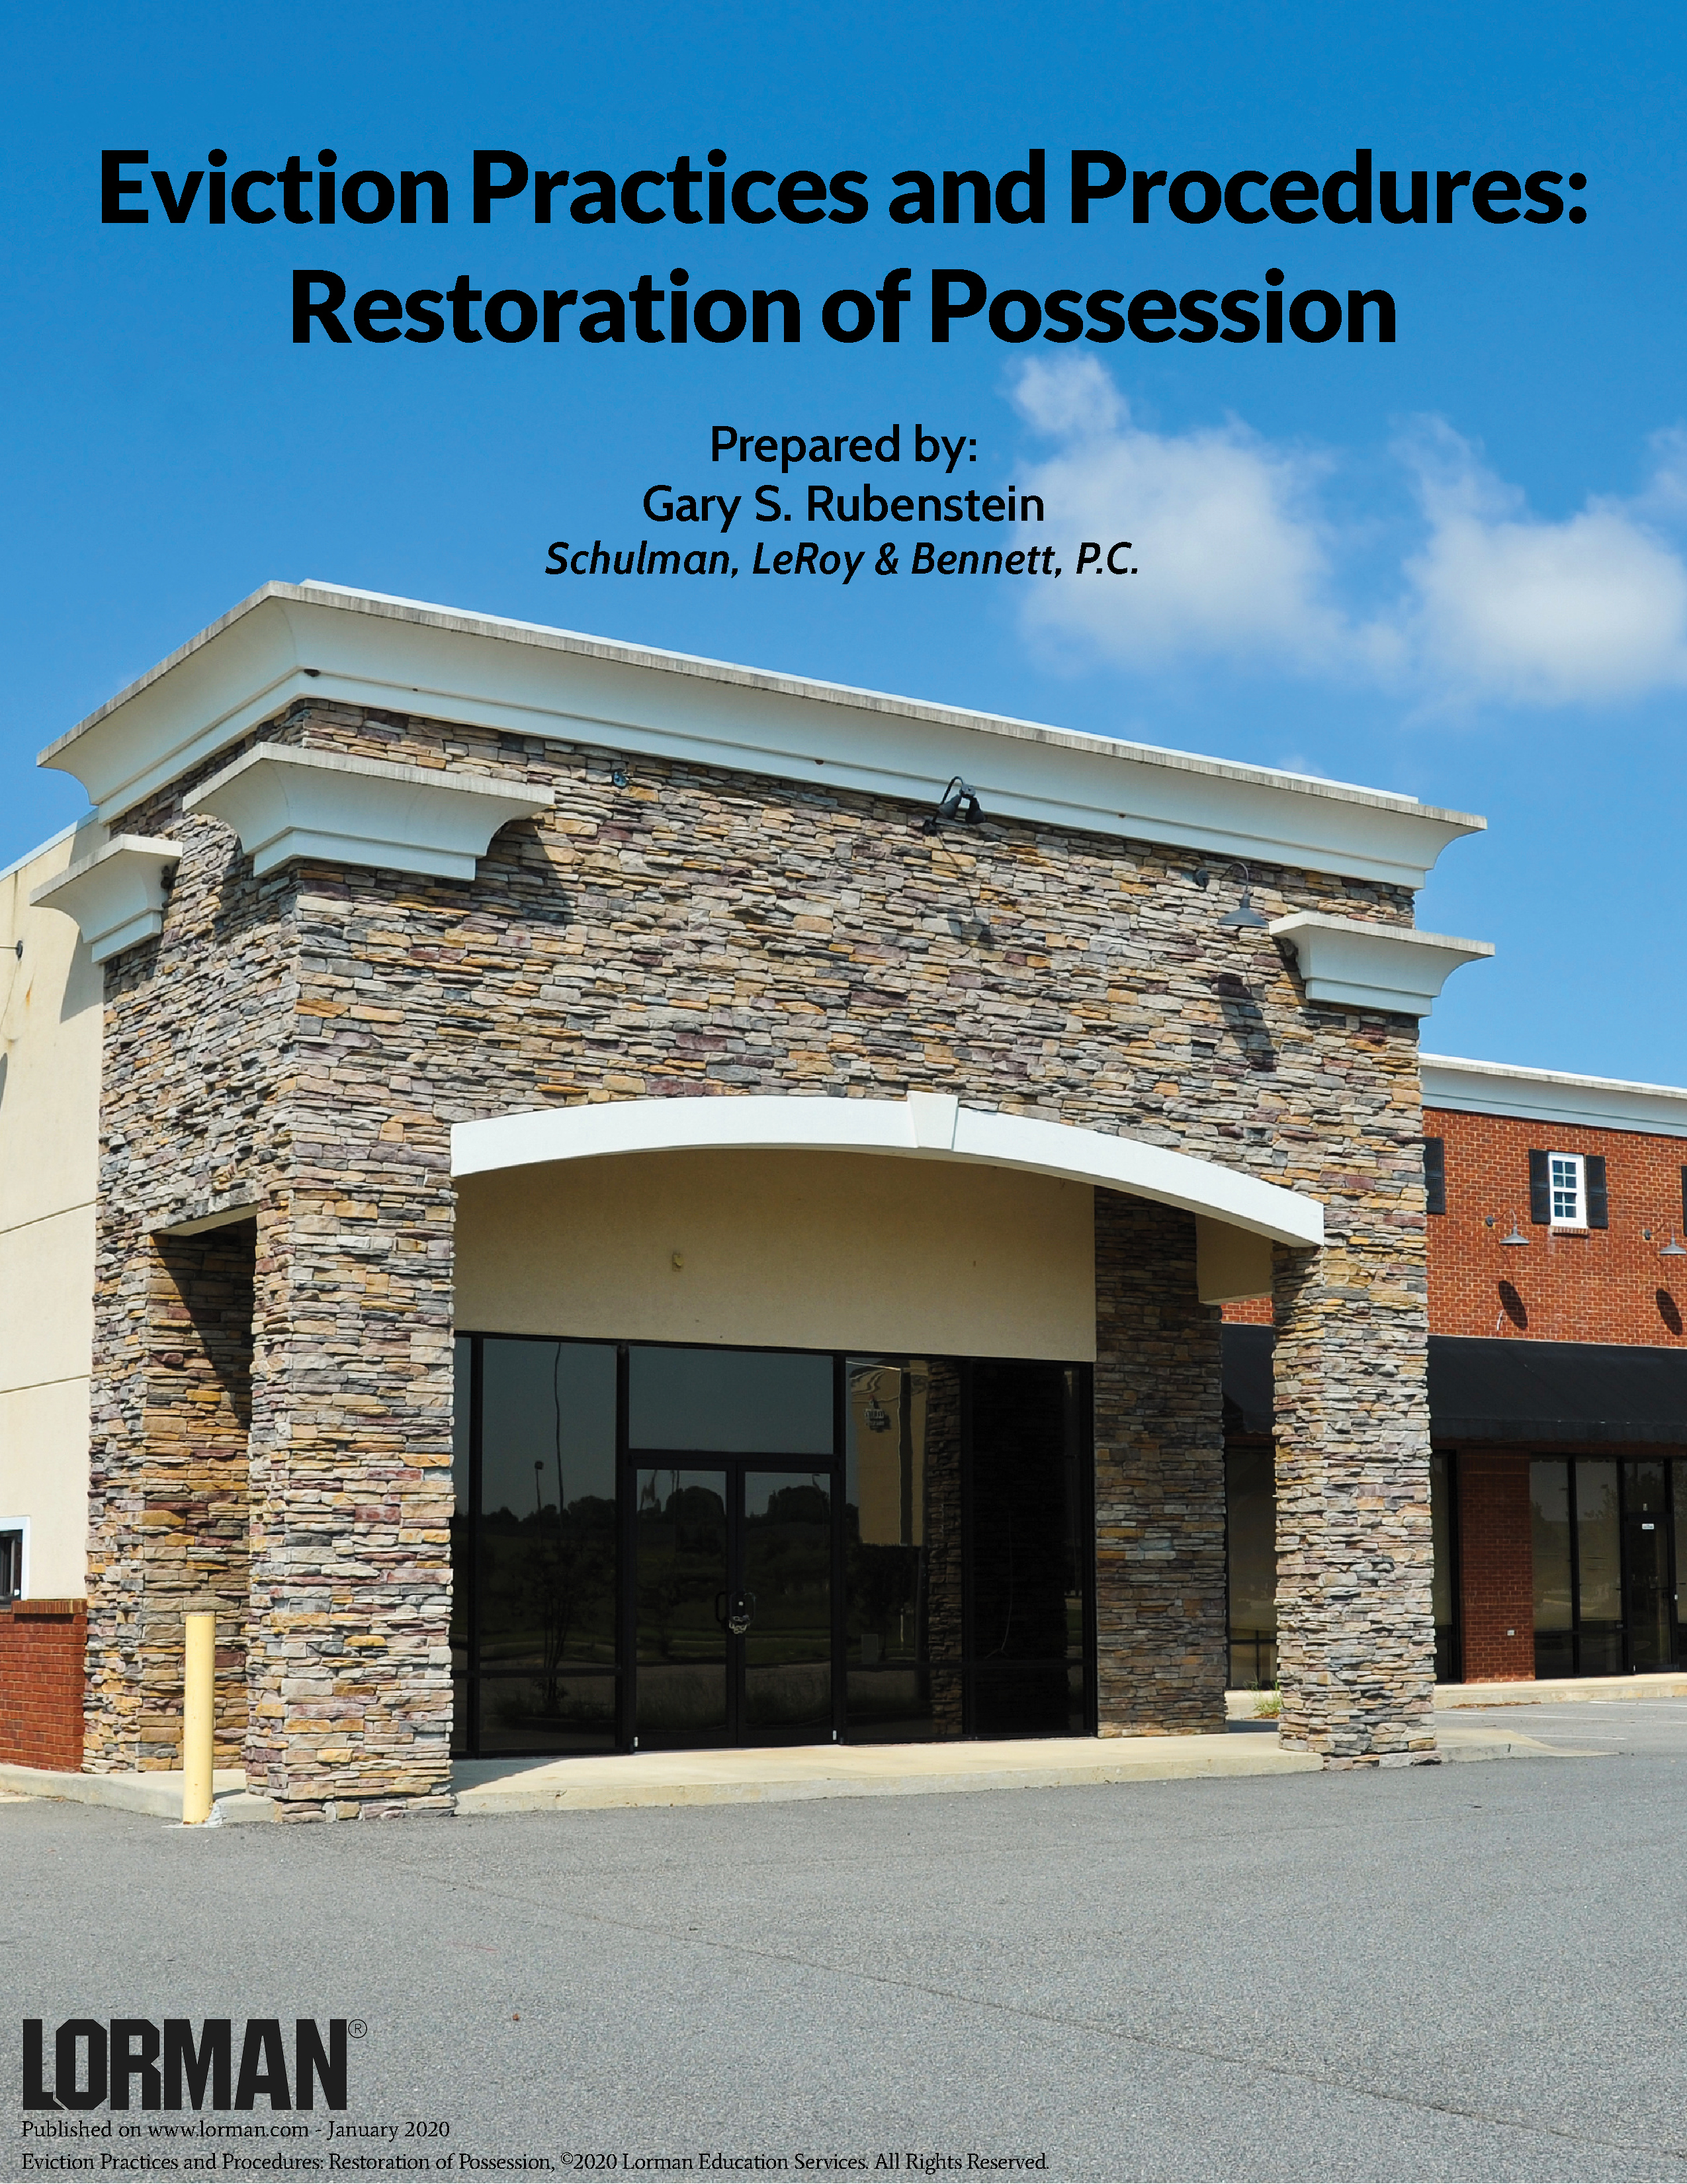 Eviction Practices and Procedures: Restoration of Possession